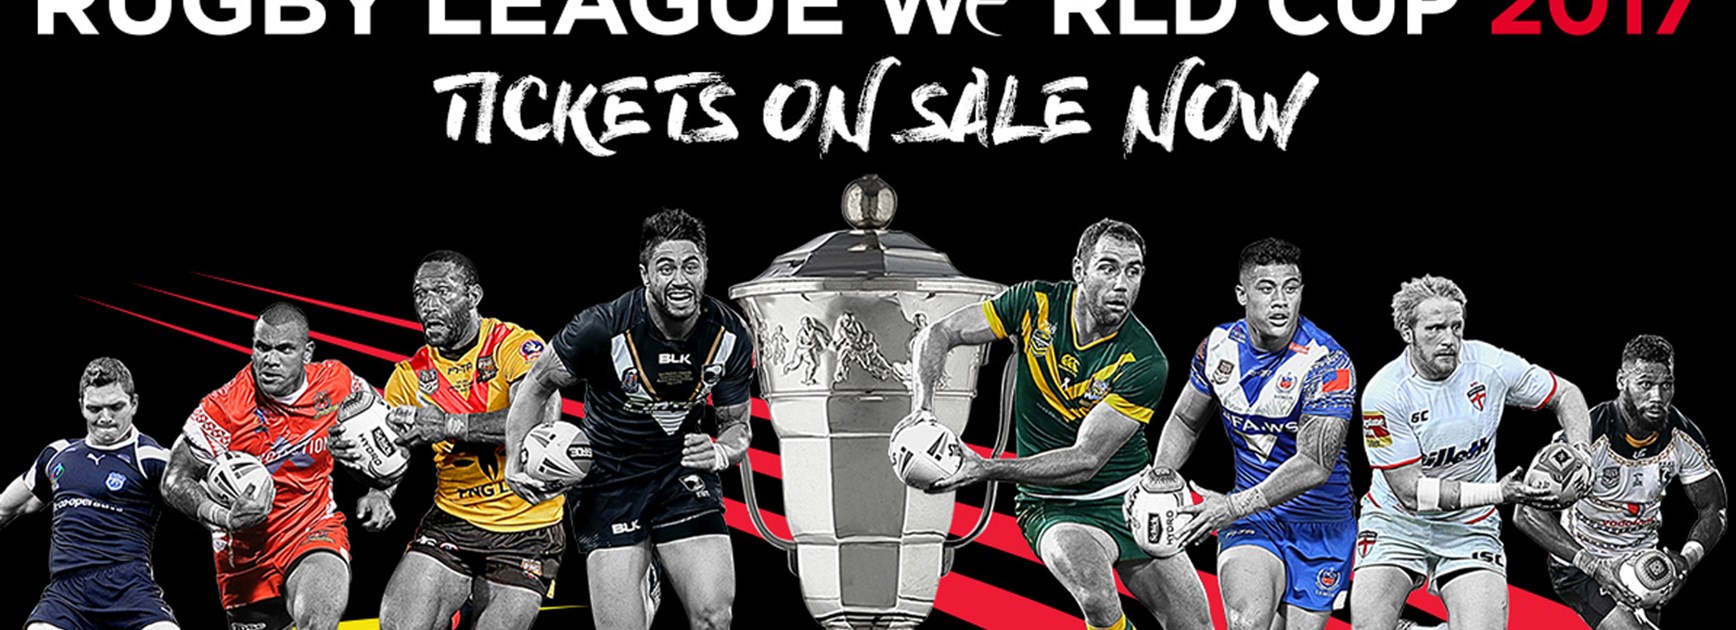 Tickets are on sale for the 2017 Rugby League World Cup.